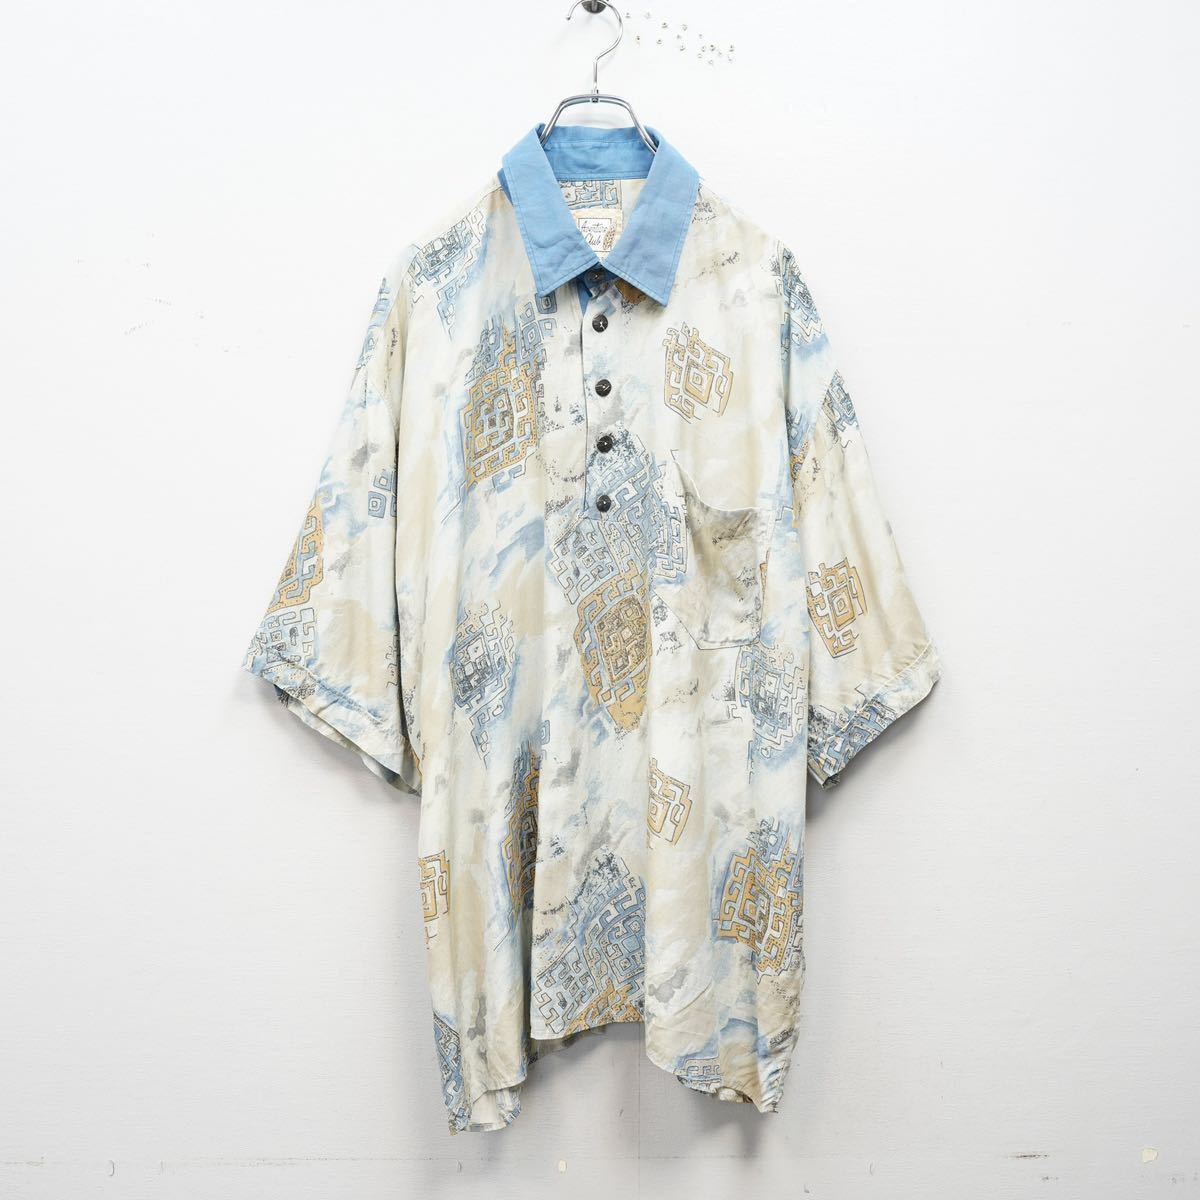 USA VINTAGE Aventune Club HALF SLEEVE PATTERNED DESIGN POLO SHIRT/アメリカ古着半袖柄デザインポロシャツ_画像4